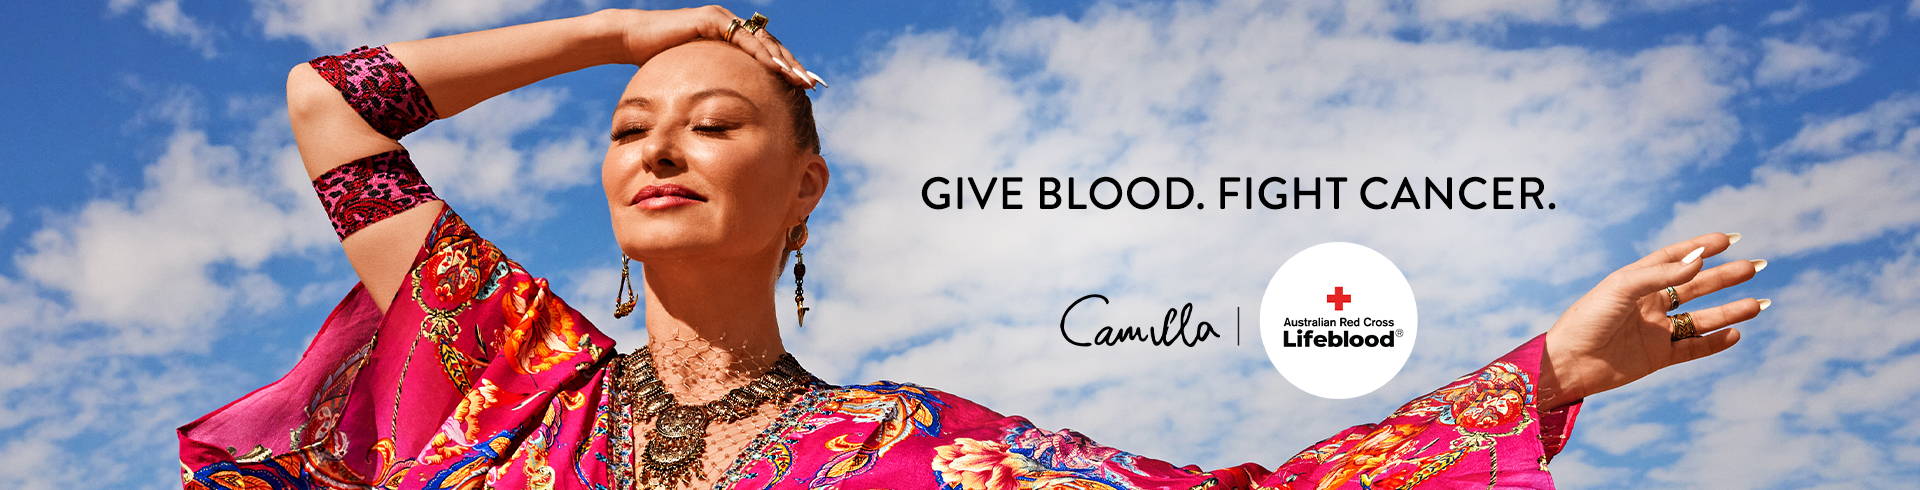 GIVE BLOOD. FIGHT CANCER. Camilla Franks x Australian Red Cross Lifeblood Campaign 